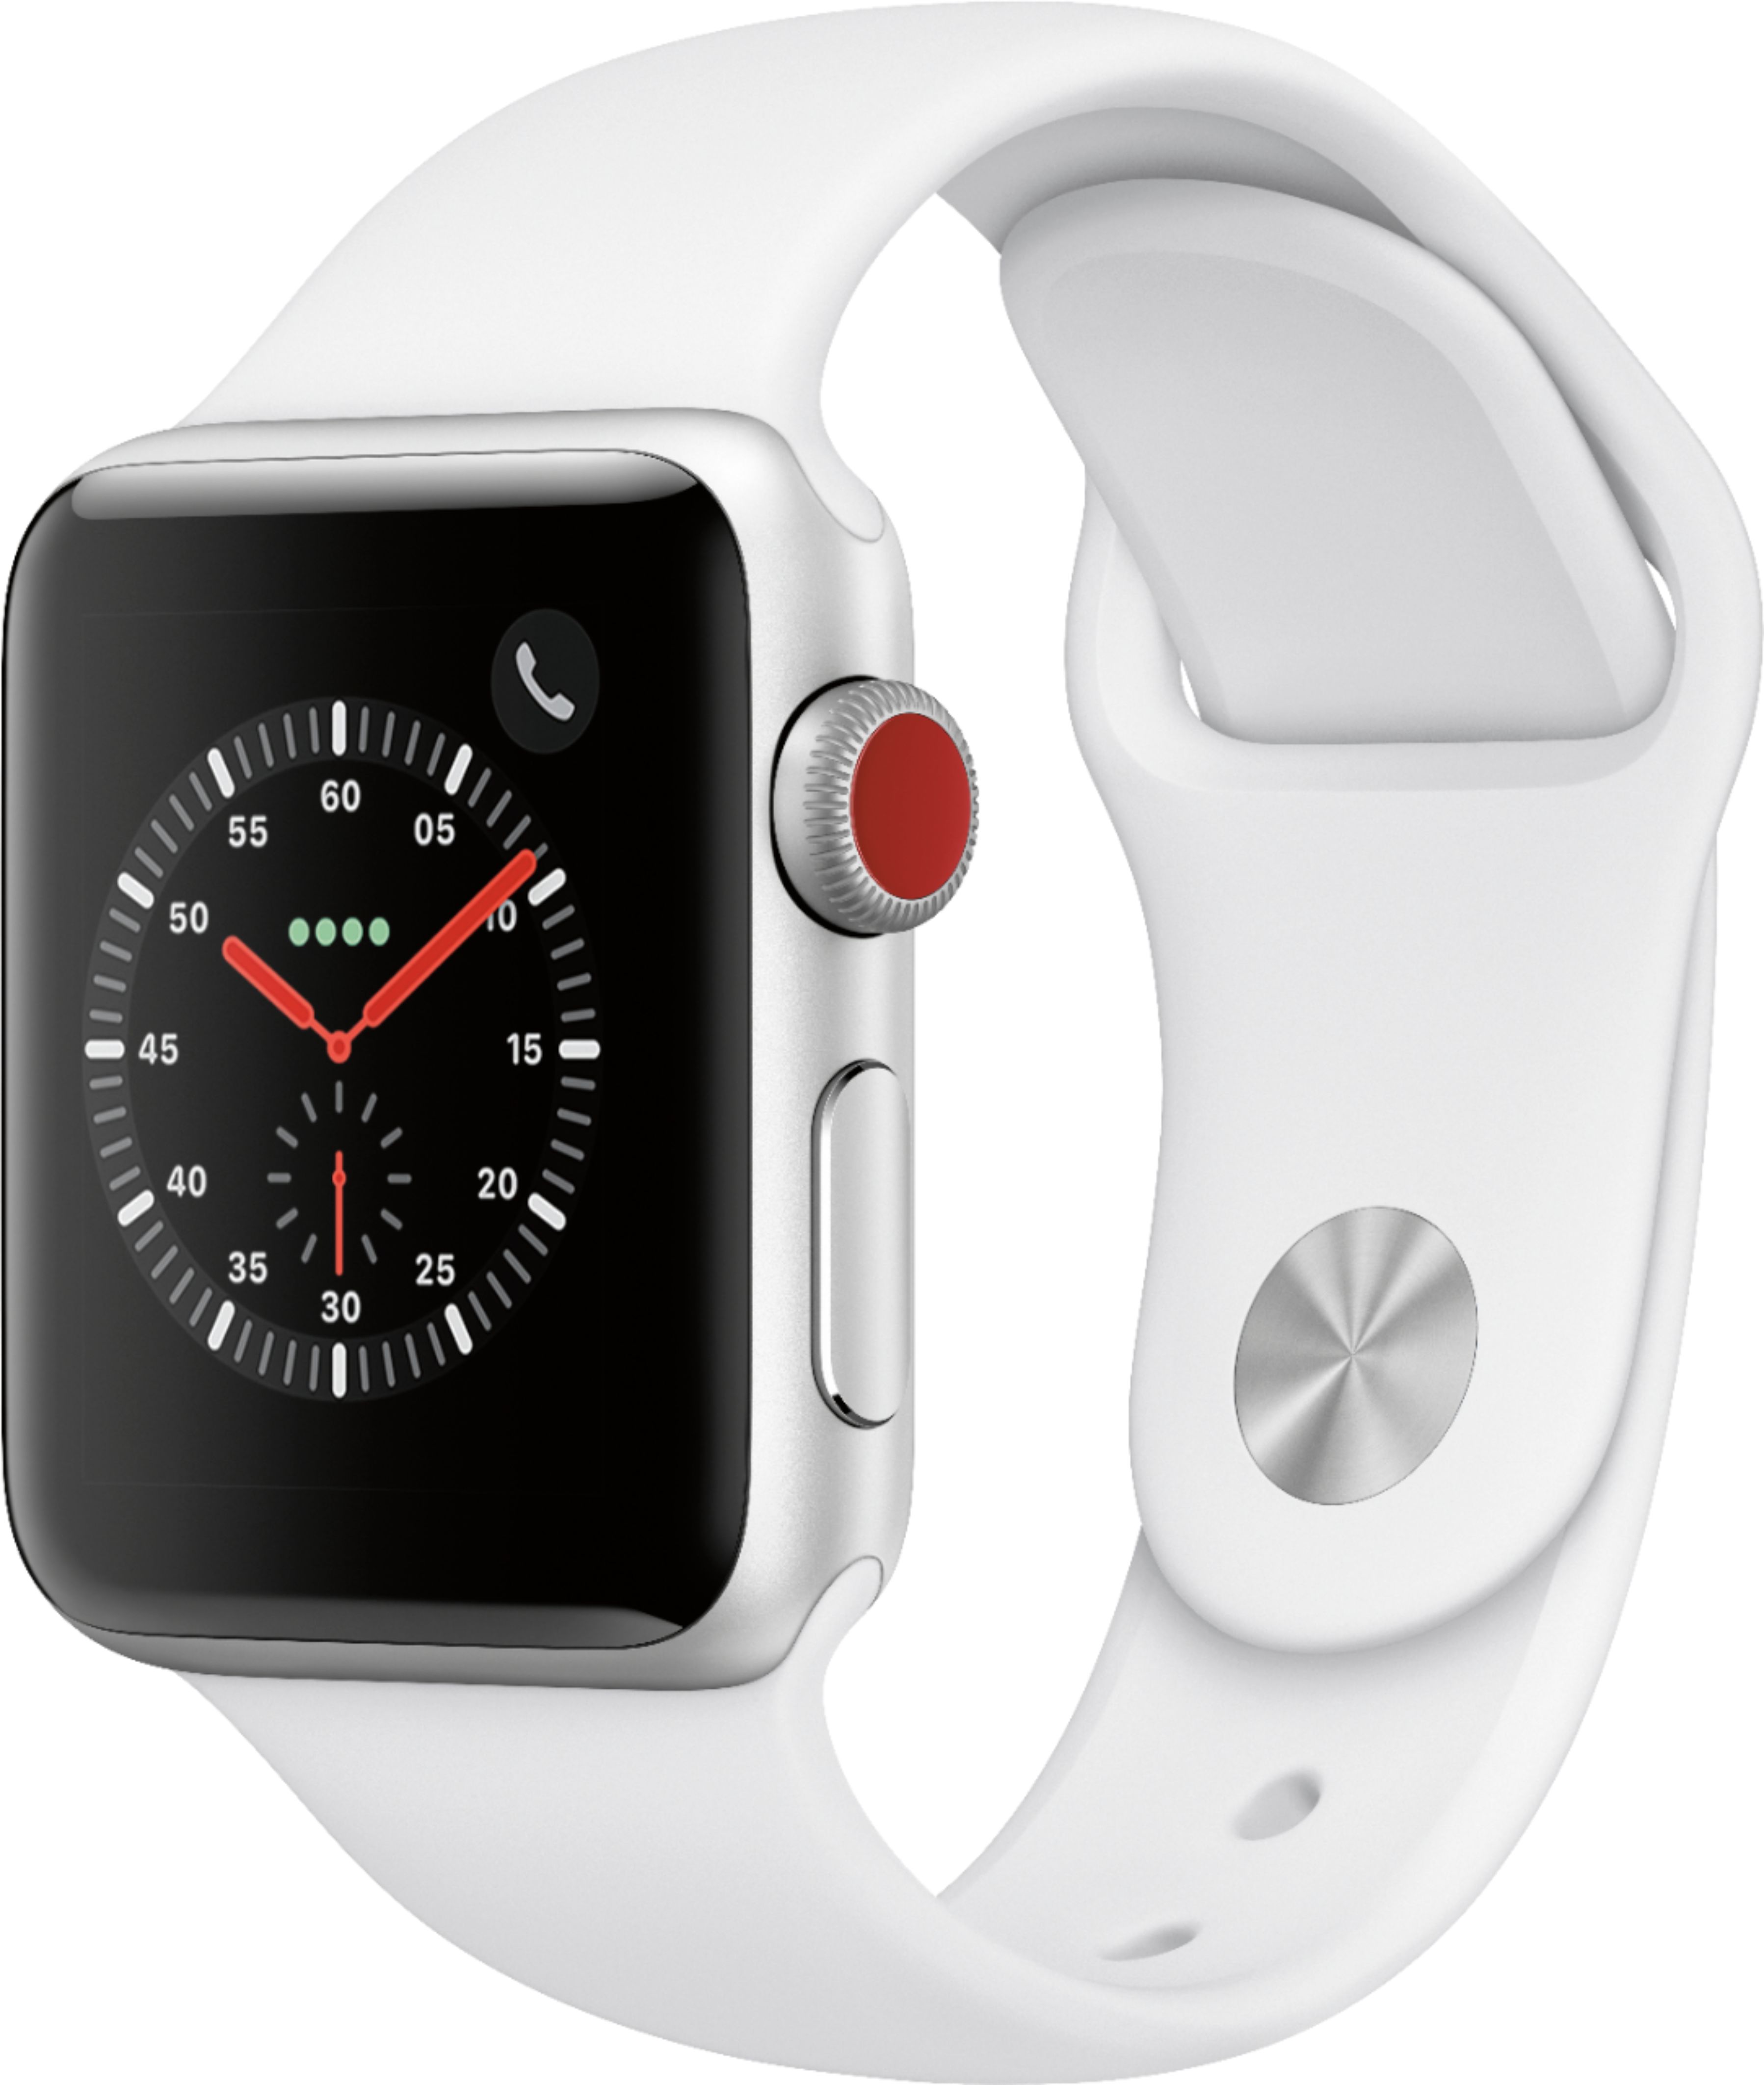 Best Buy: Watch Series 3 (GPS + Cellular) 38mm Aluminum Case with White Sport Band Aluminum (AT&T) MTGG2LL/A